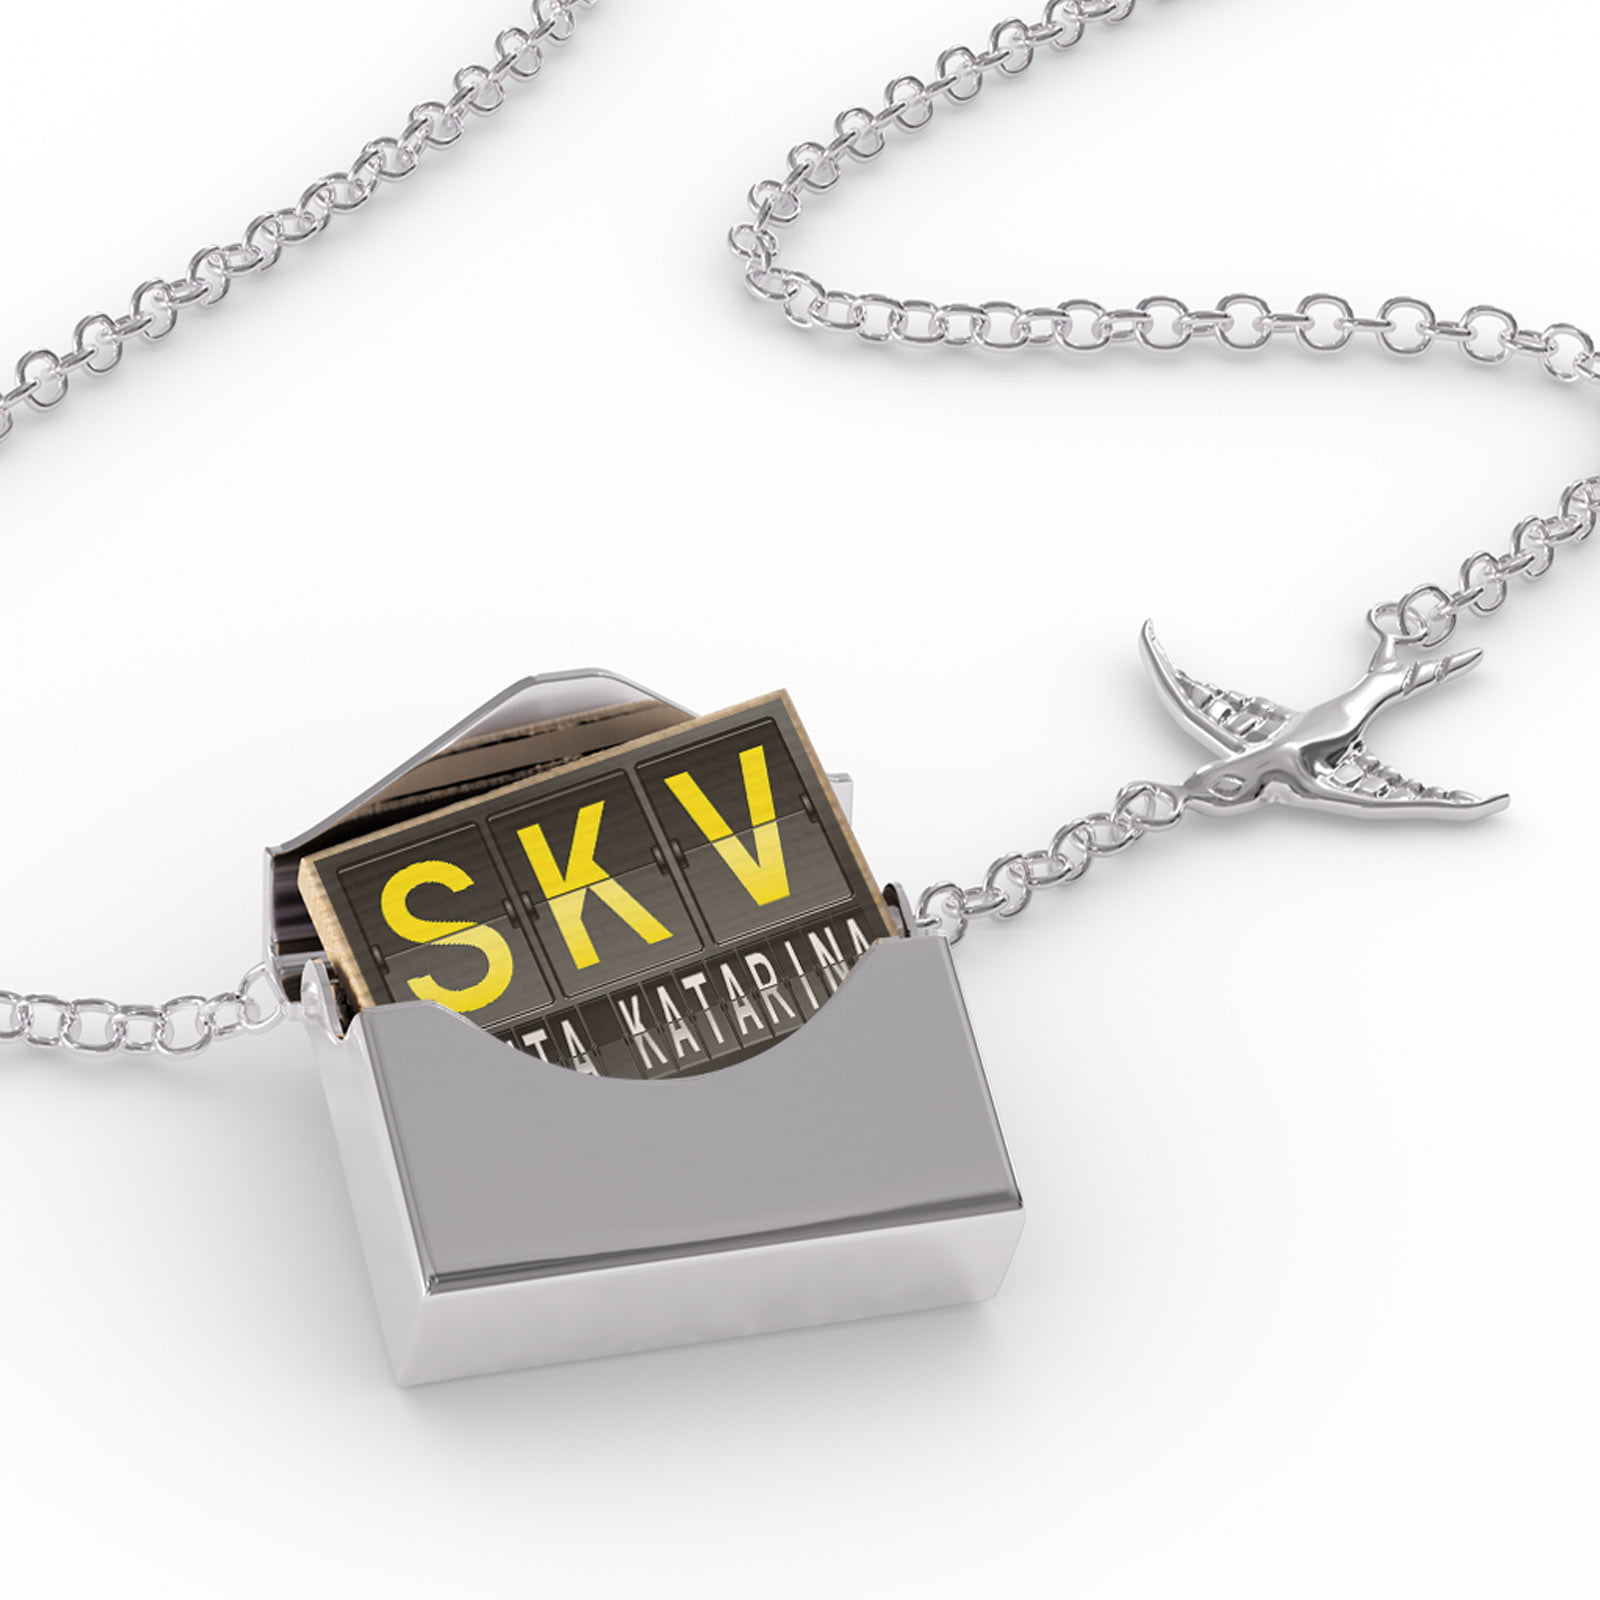 NEONBLOND Personalized Name Engraved Airportcode SKV Santa Katarina Dogtag Necklace